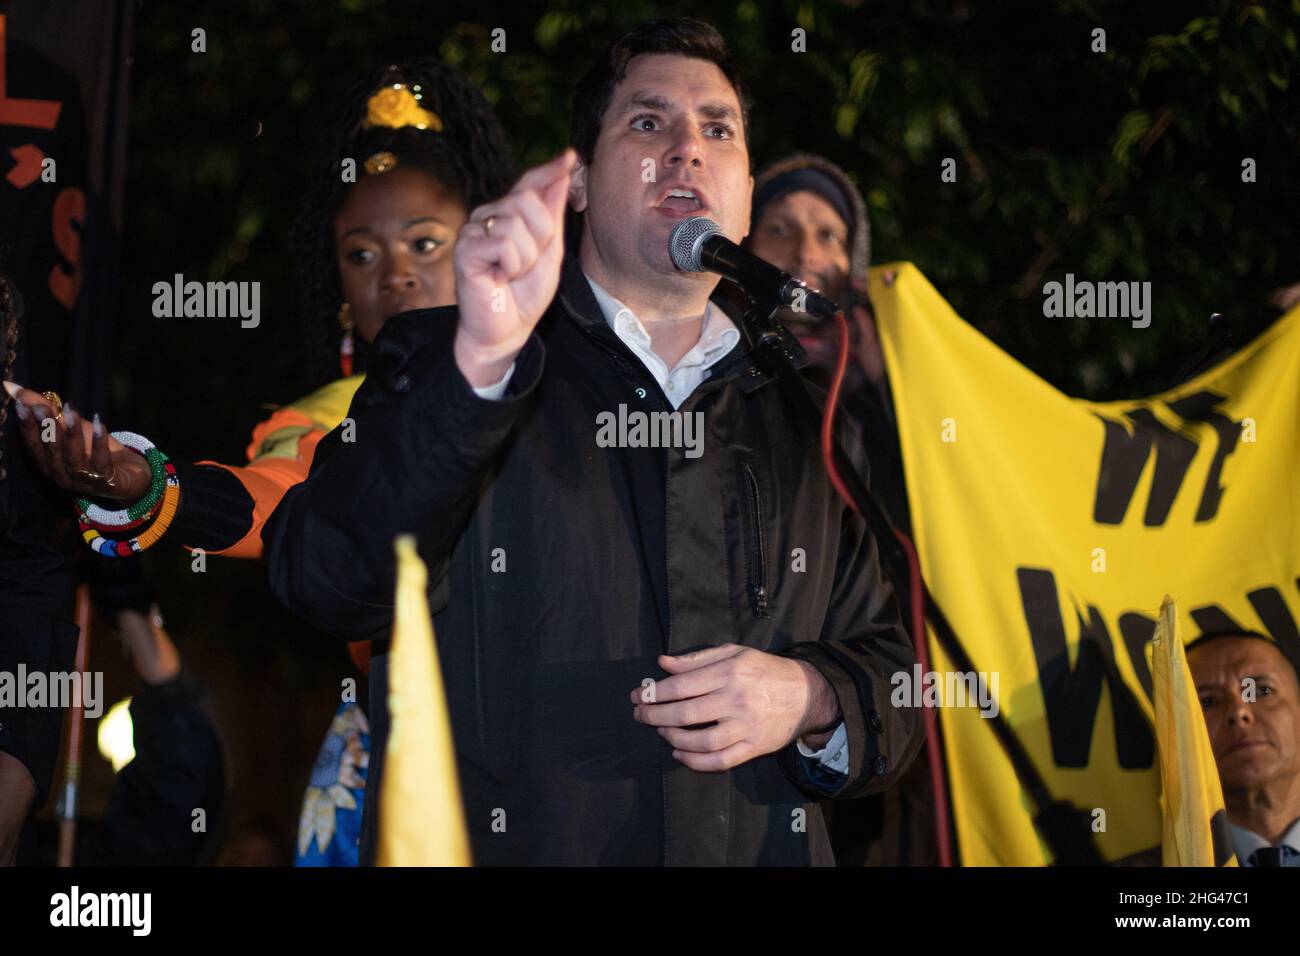 London, England, UK 17 January 2022 Hundreds of protesters from XR, BLM and Kill the Bill gather at the House of Lords ahead of voting on the Police, Crime, Sentencing and Courts Bill. The crowd is addressed by Richard Burgon, Labour MP for Leeds East Stock Photo